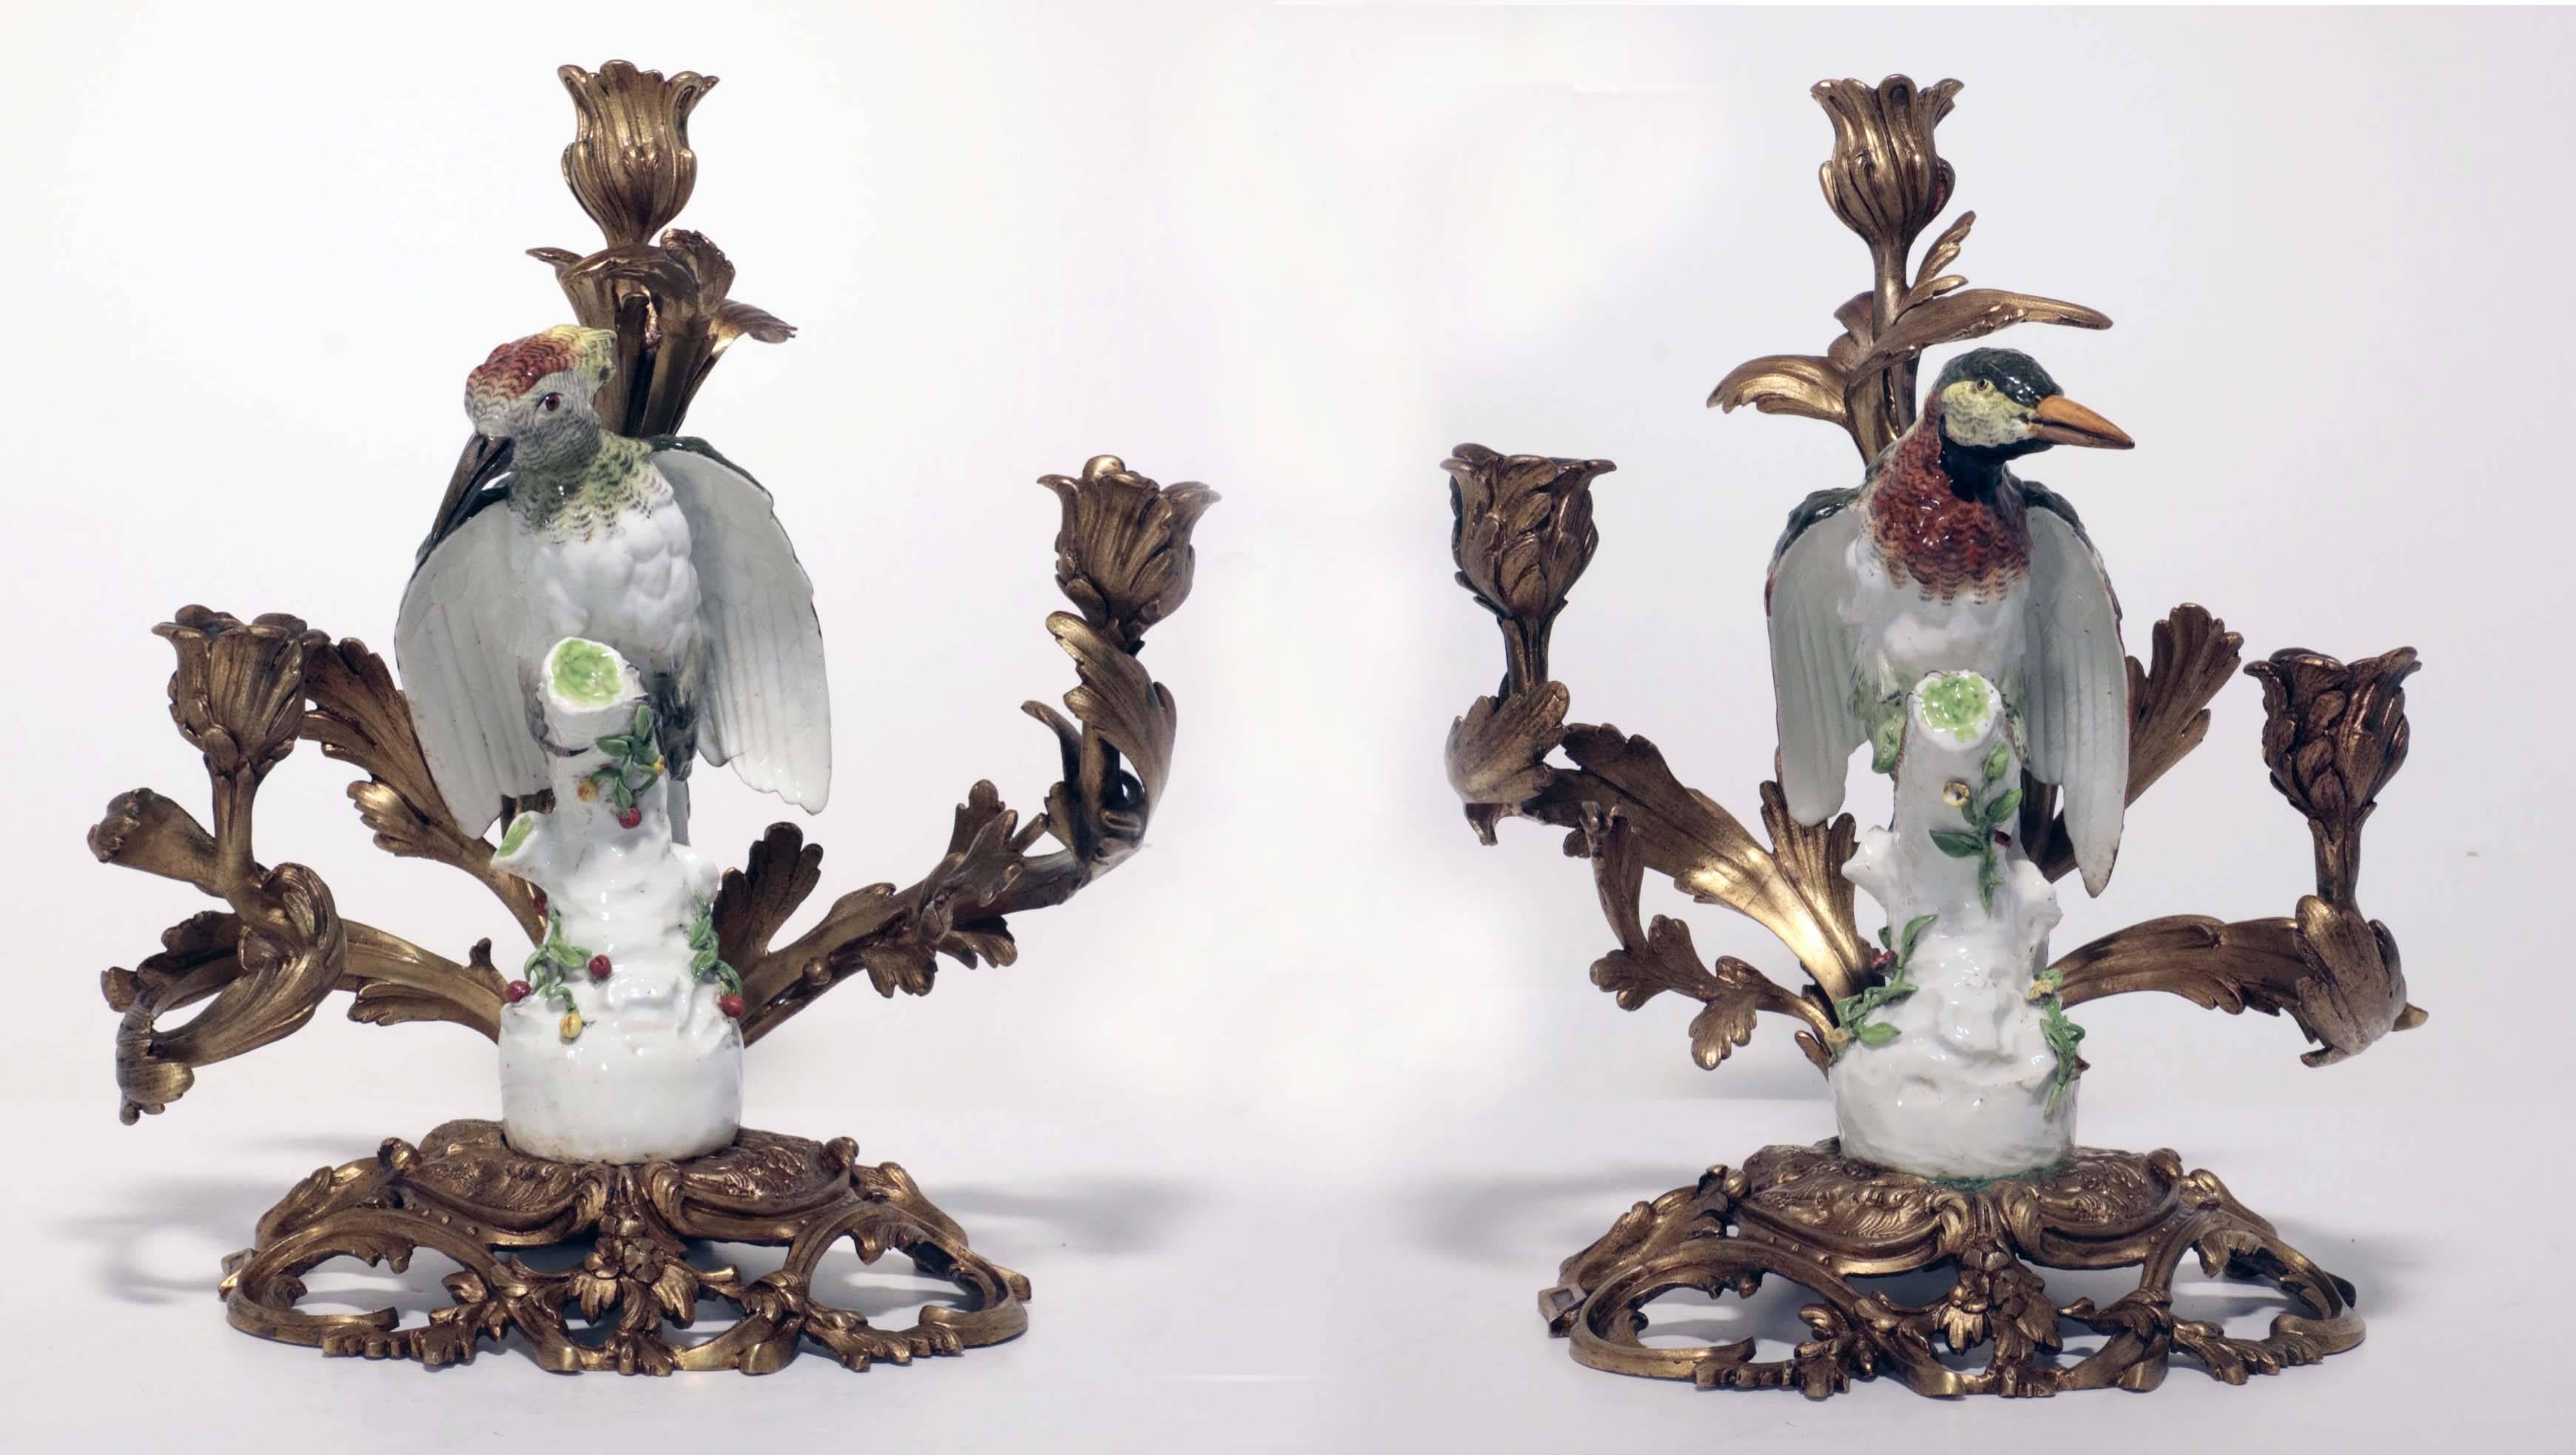 Each bird is modeled on a stump applied with plants and moss. They are naturalistically modeled with colorful plumage. The birds are mid-19th century at latest. The bronze mounts are early 20th century modeled as stylized acanthus and support three